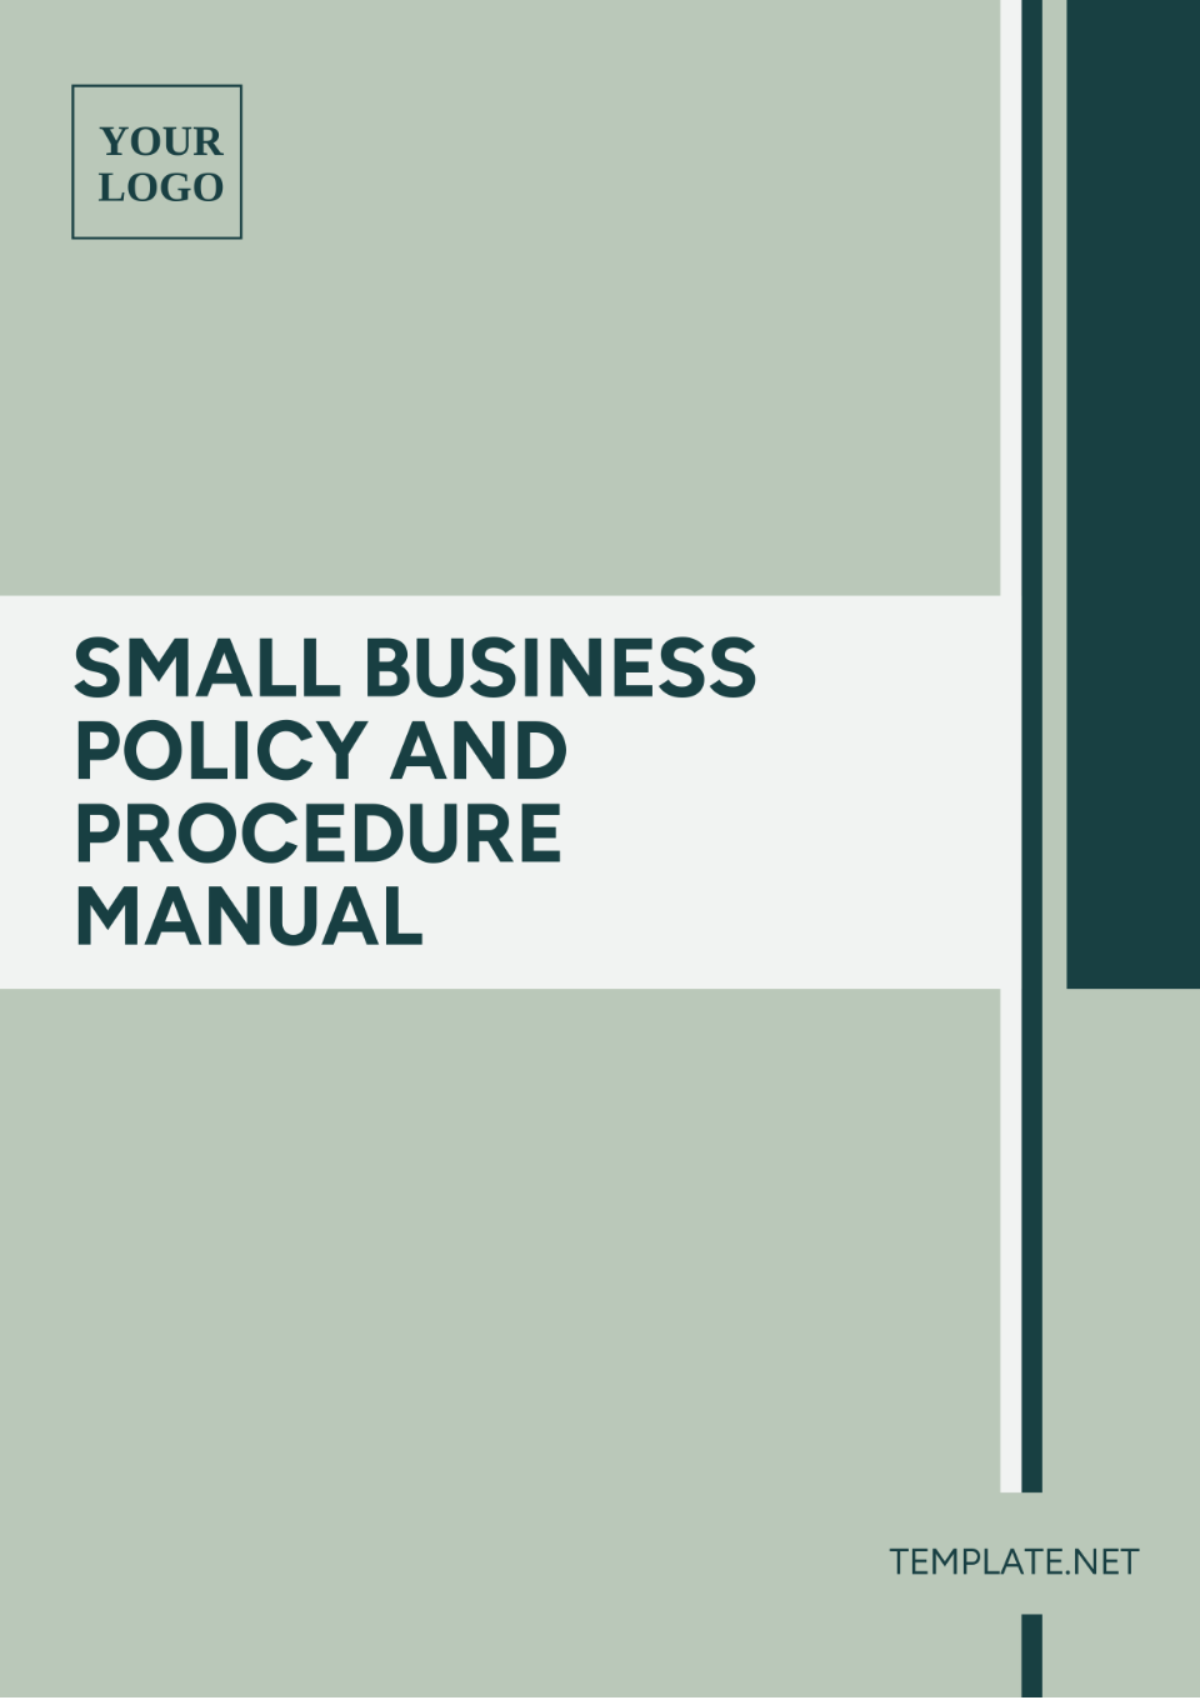 Free Small Business Policy and Procedure Manual Template